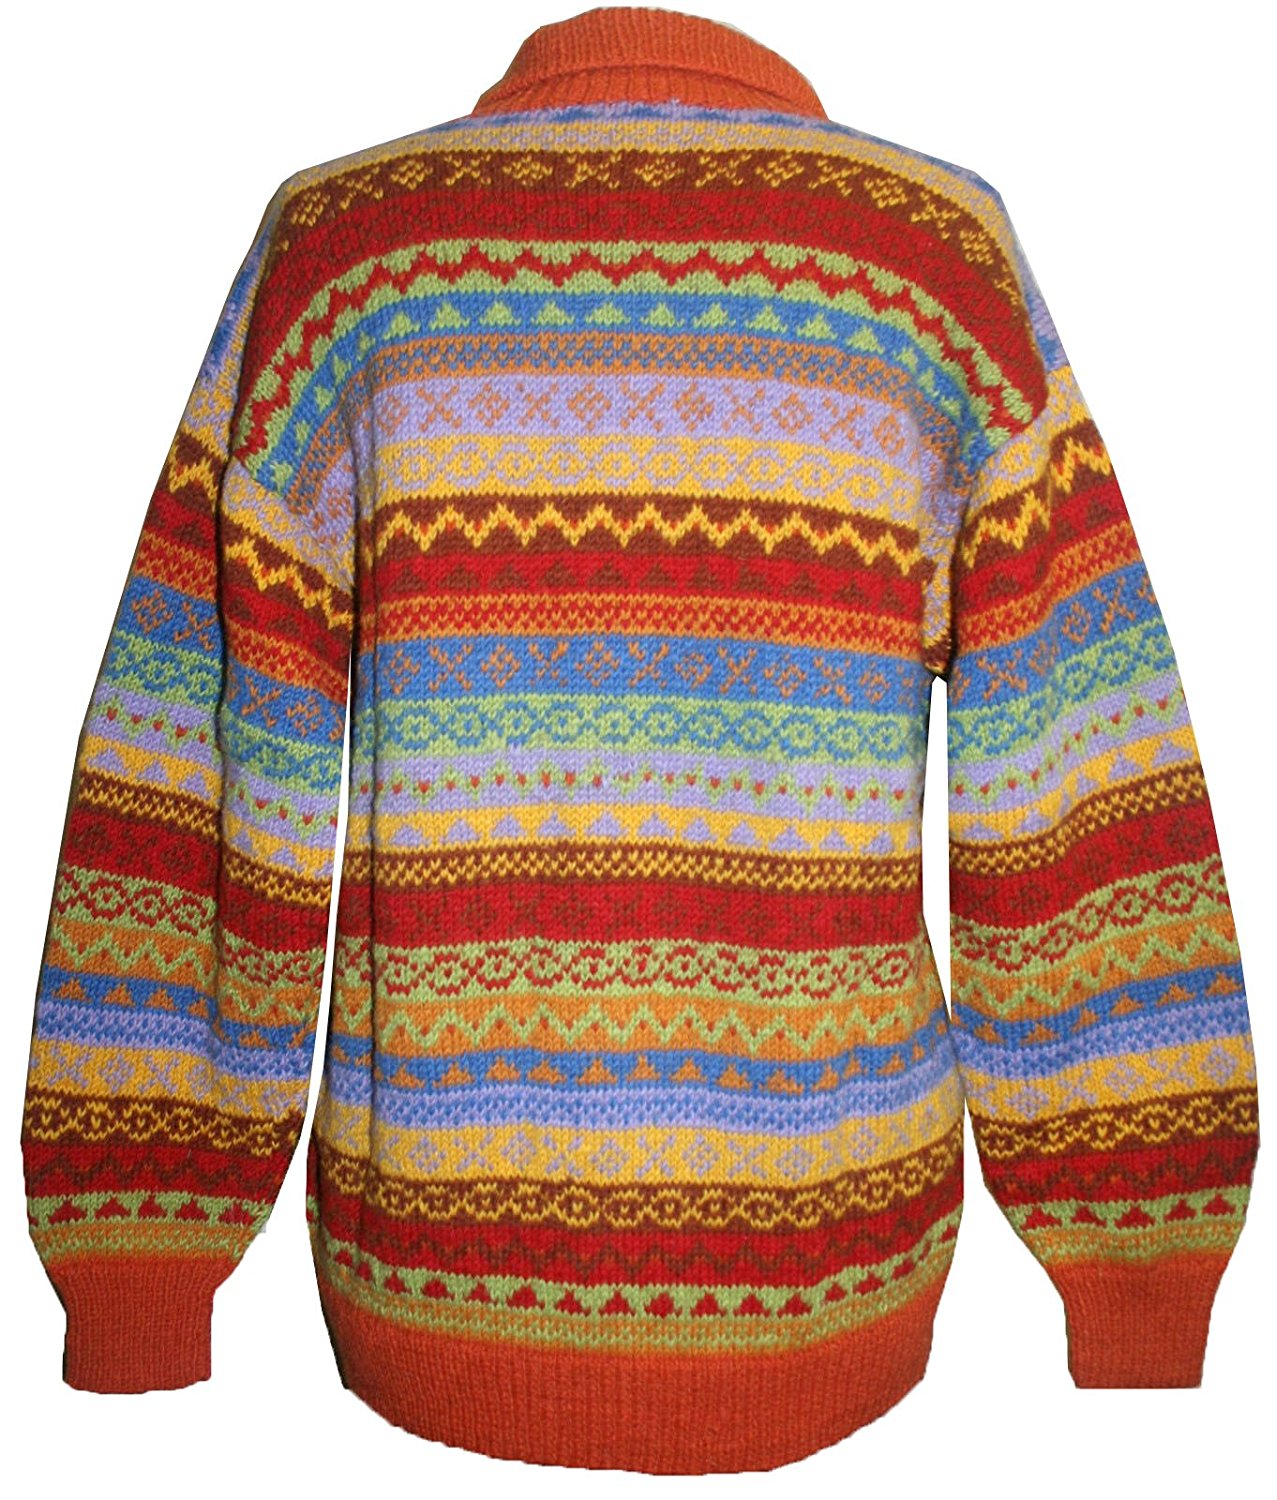 Wool Cardigan Sweater Hand knitted in Nepal – Agan Traders